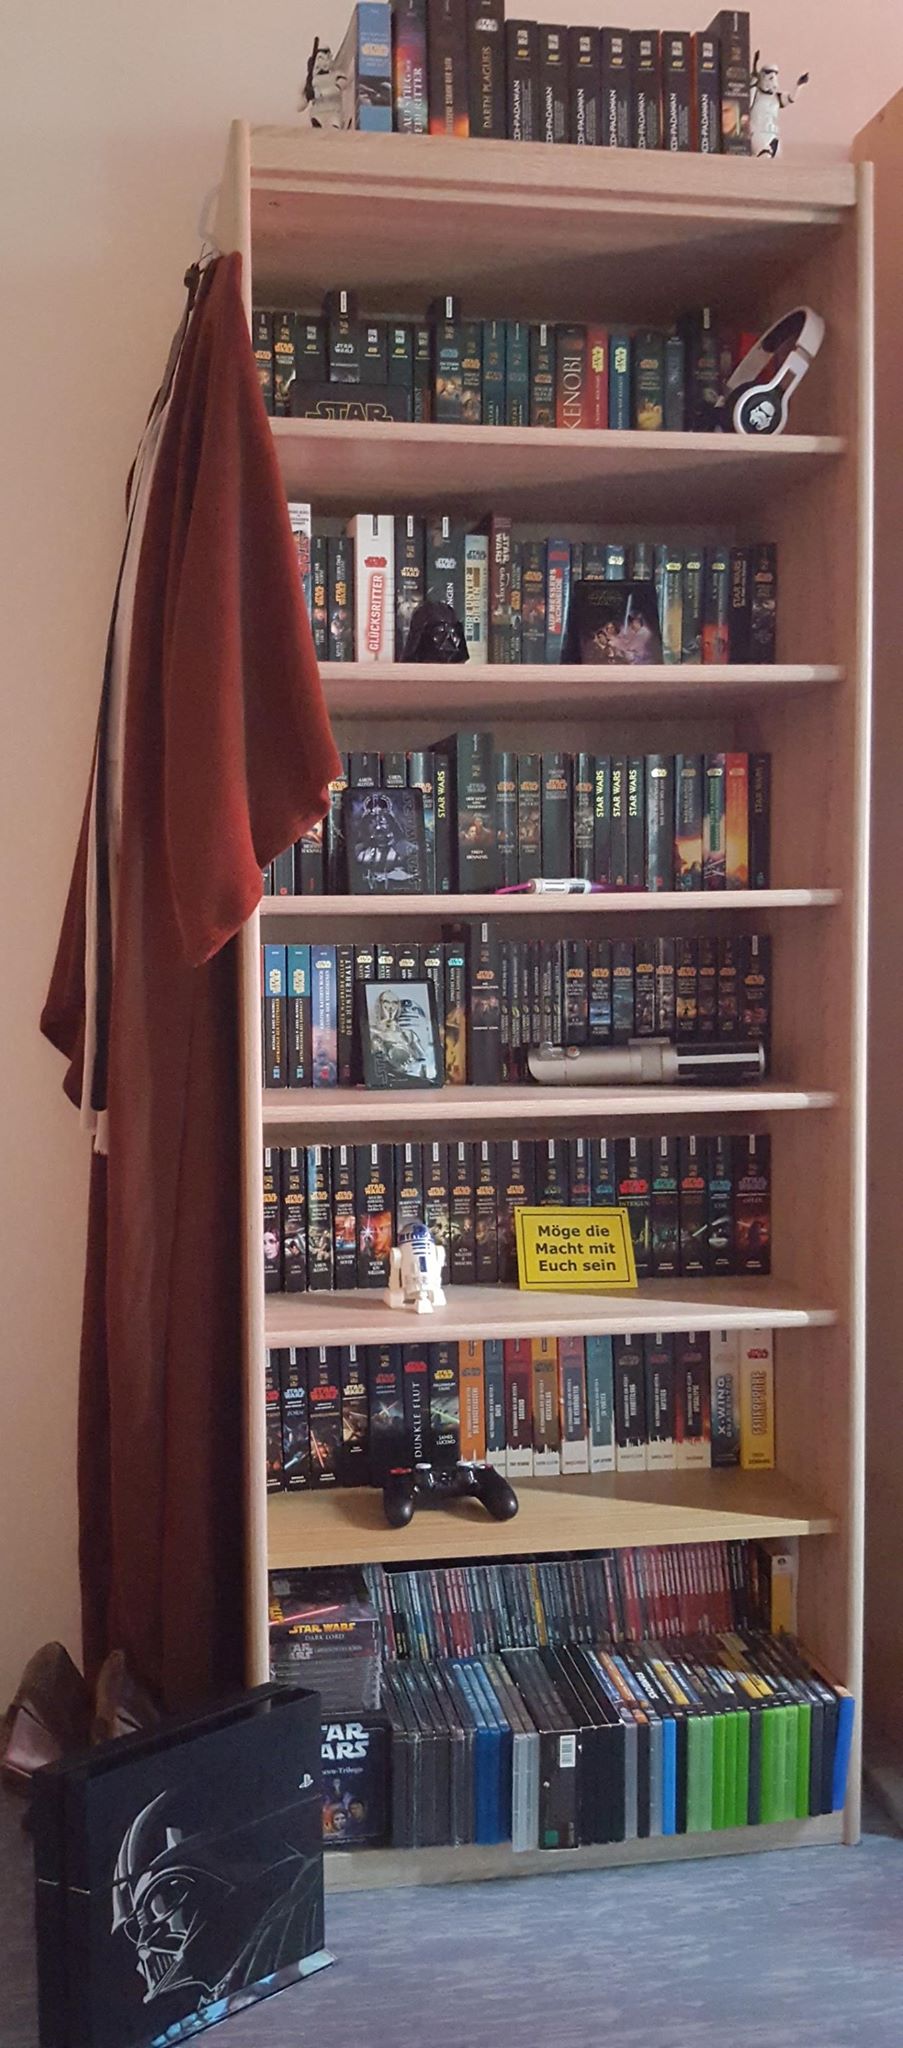 Paul's Star Wars library